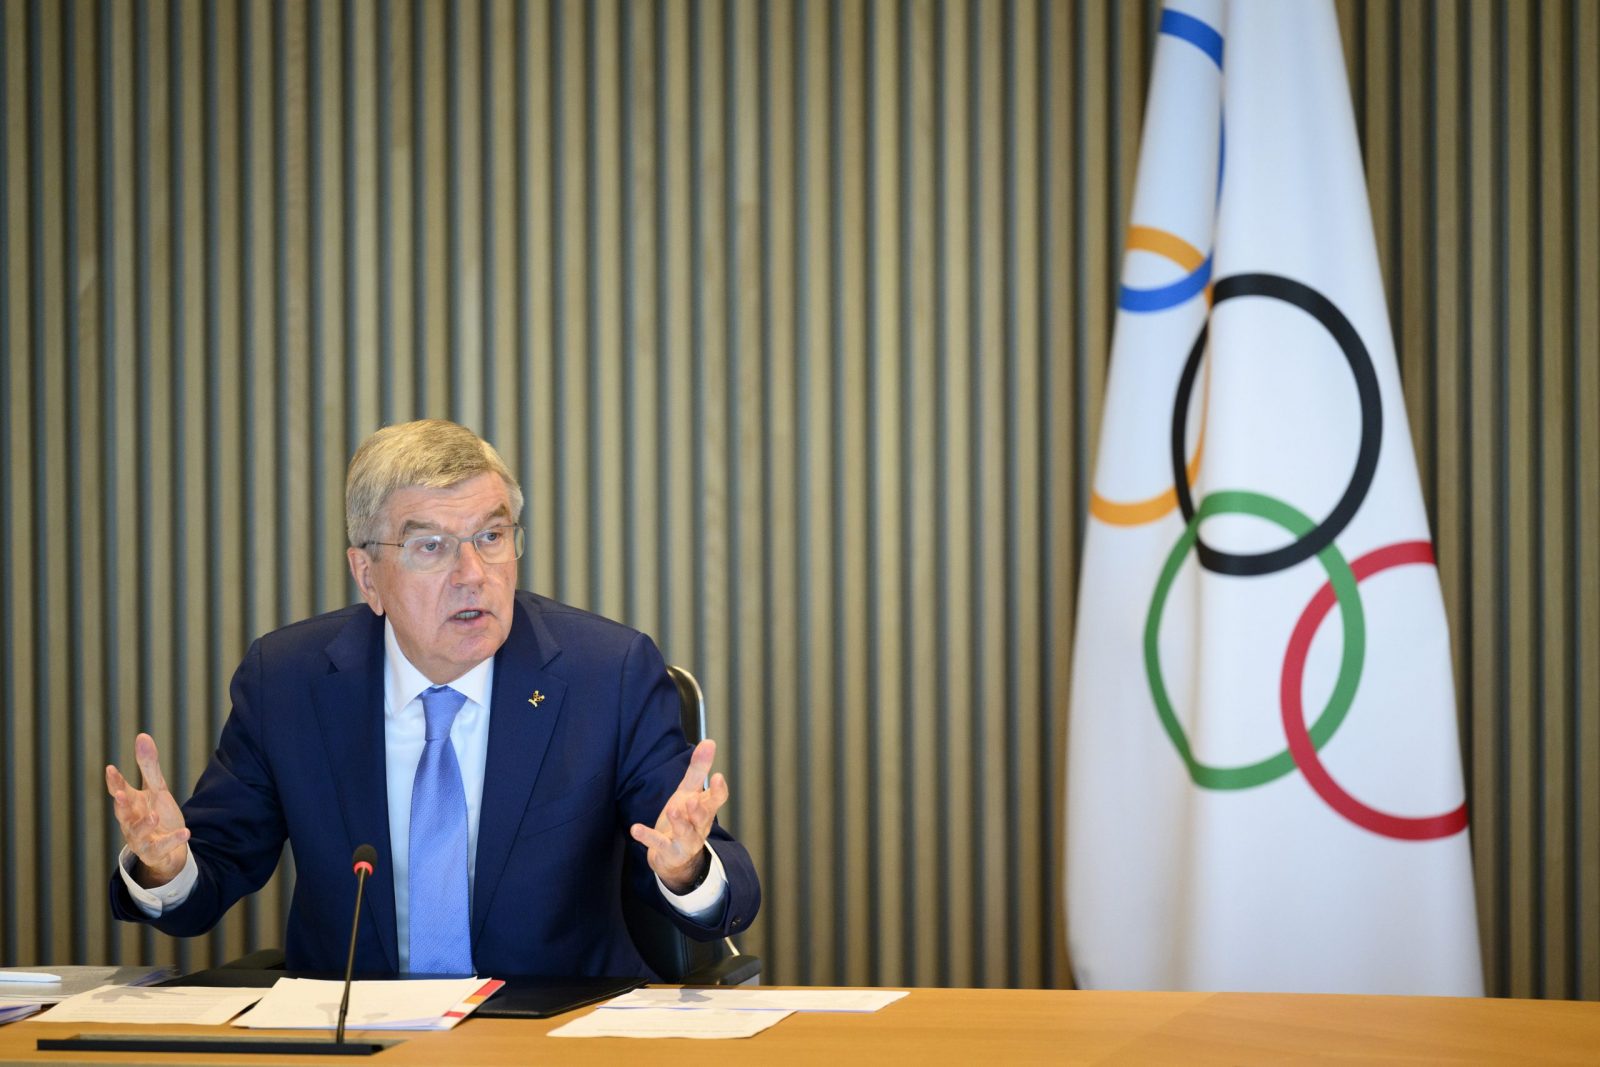 epa10546651 International Olympic Committee (IOC) President Thomas Bach speaks at the opening of the executive board meeting of the International Olympic Committee (IOC), at the Olympic House, in Lausanne, Switzerland, 28 March 2023. The International Olympic Committee (IOC) Executive Board is set to discuss the results of consultations regarding the status of athletes from Russia and Belarus in its meeting set to run until March 30.  EPA/LAURENT GILLIERON